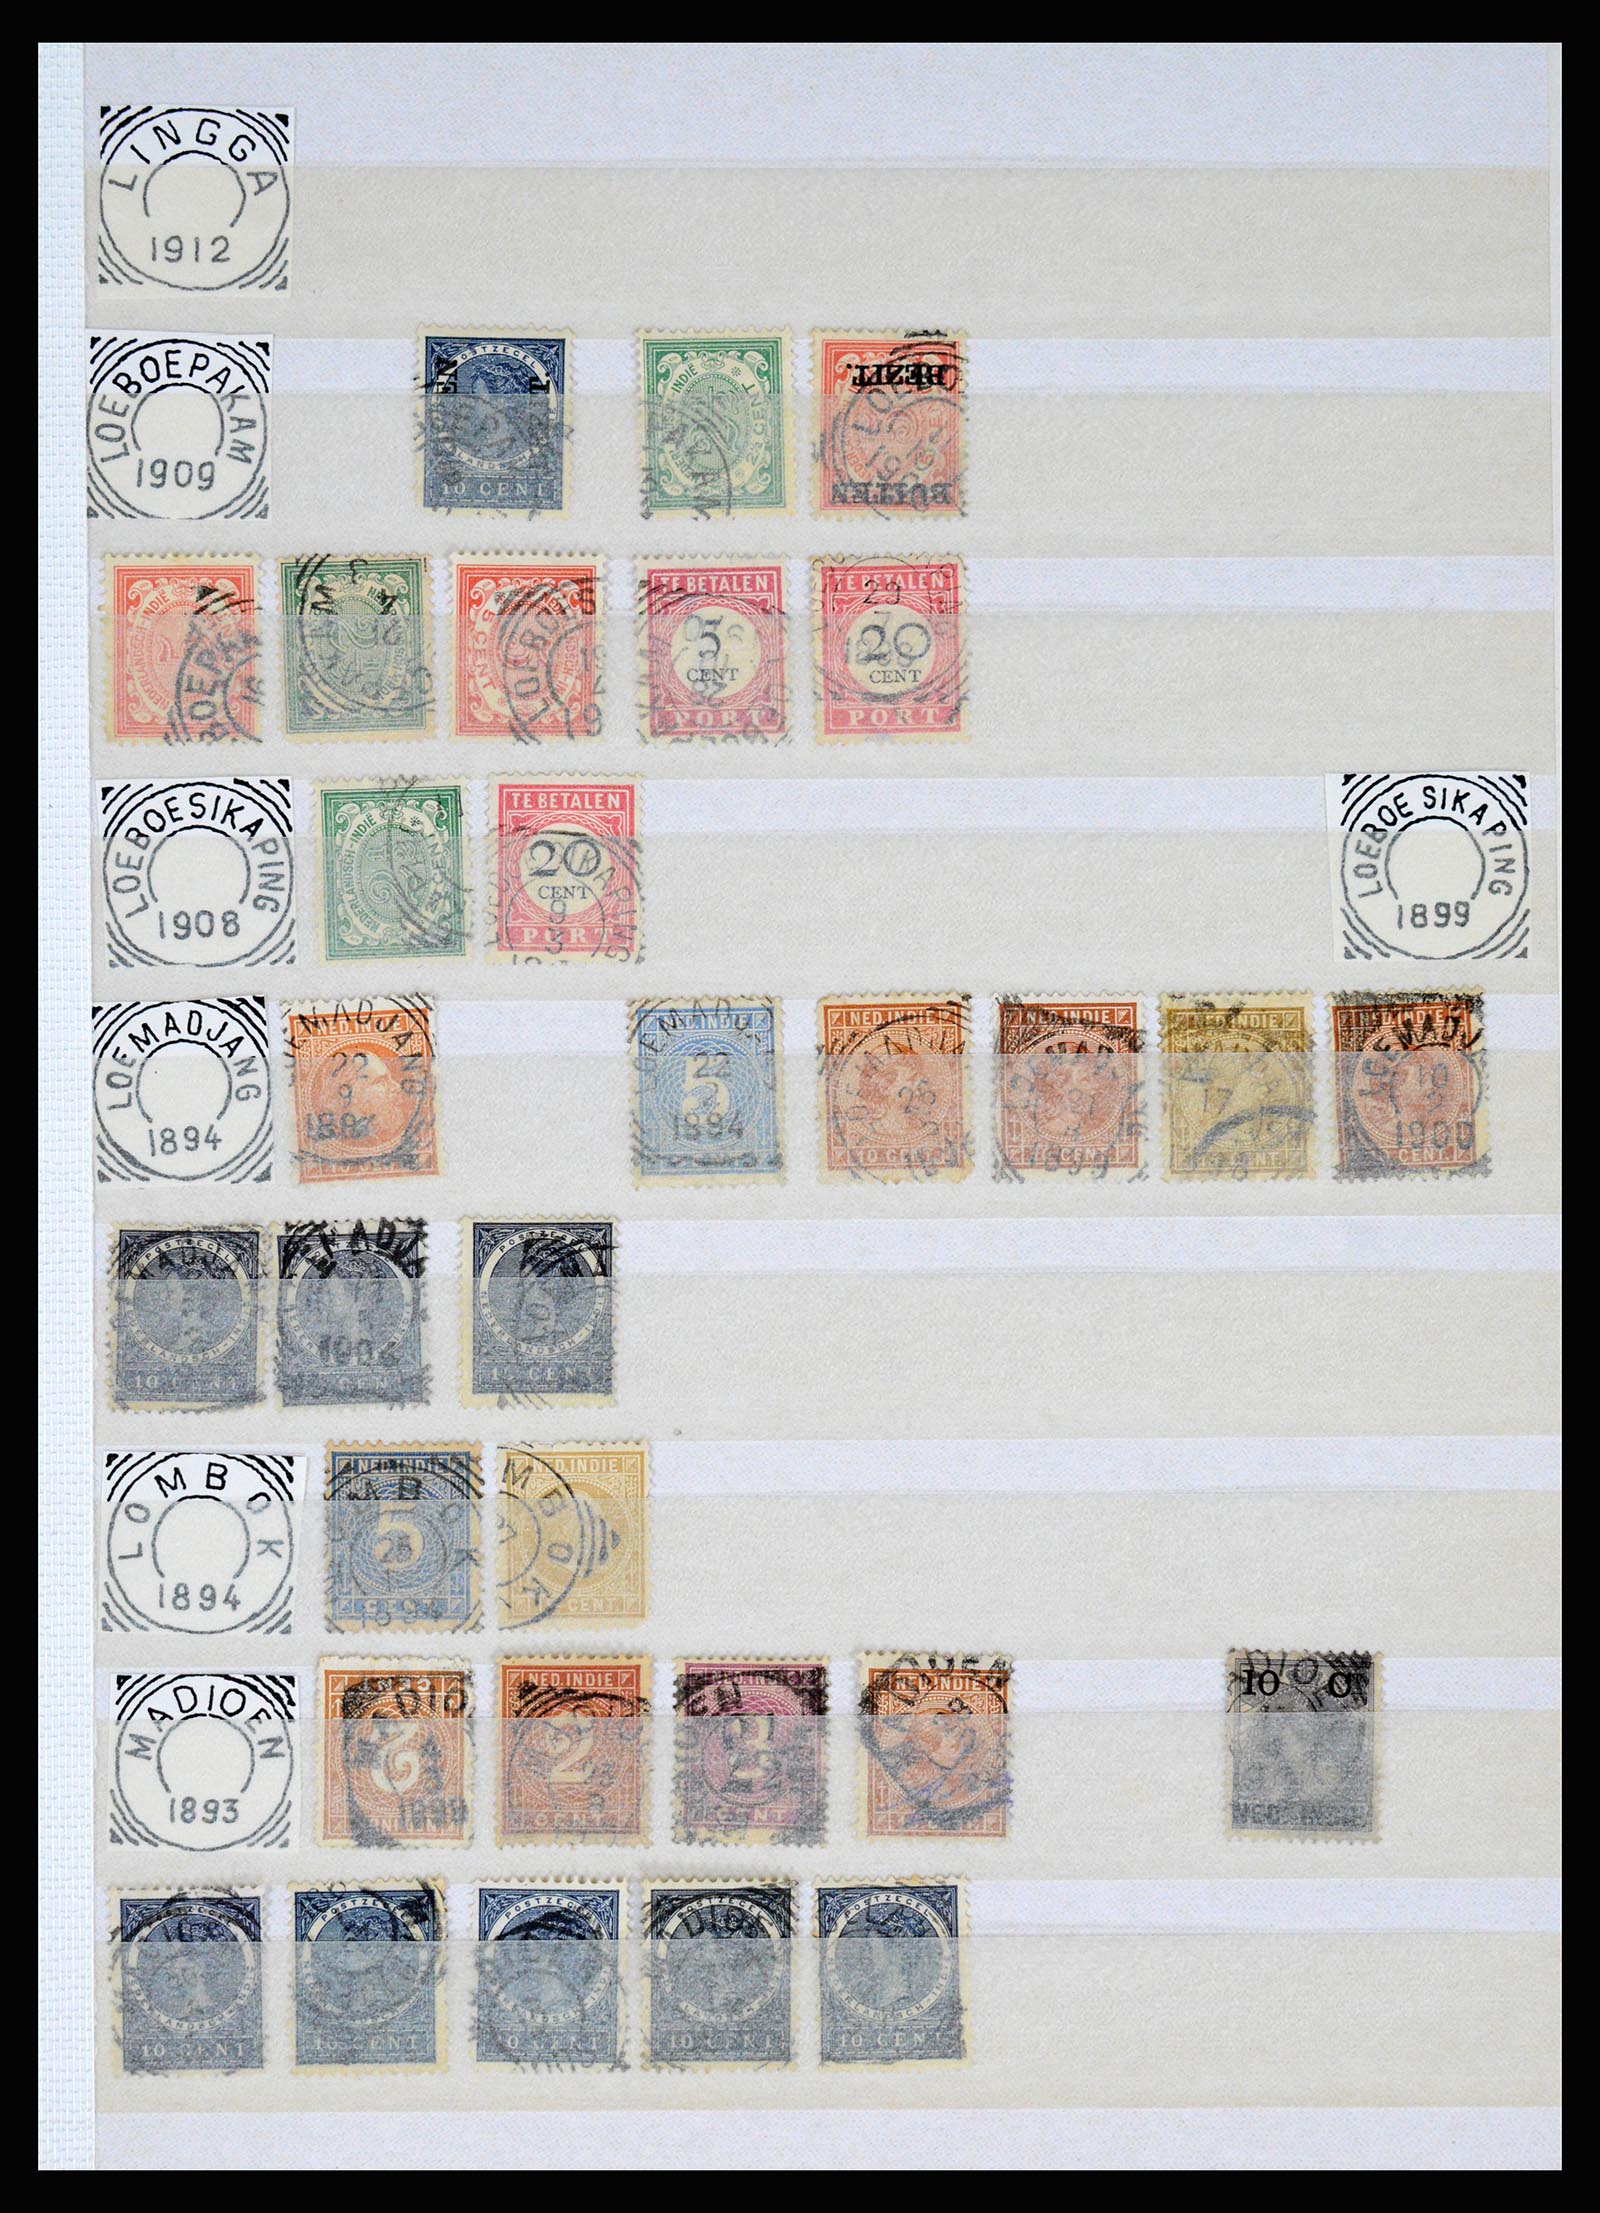 36839 076 - Stamp collection 36839 Dutch east Indies square cancels.